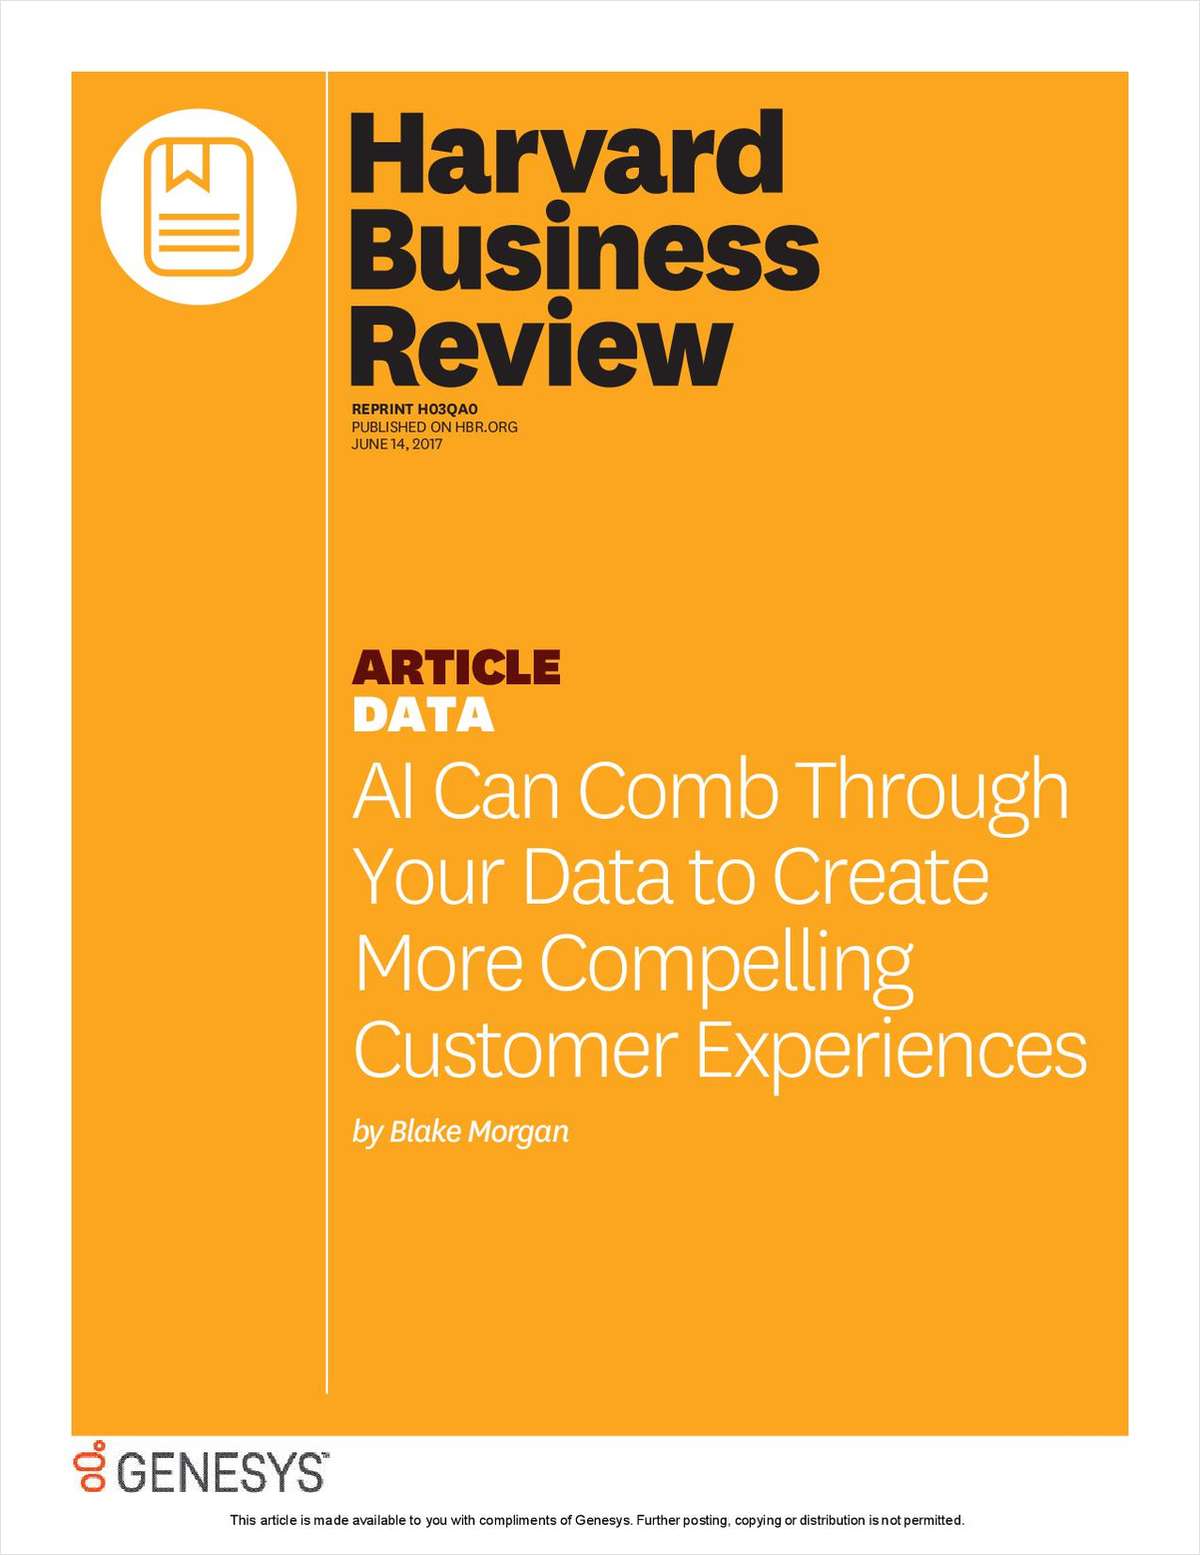 AI Can Comb Through Your Data to Create More Compelling Customer Experience